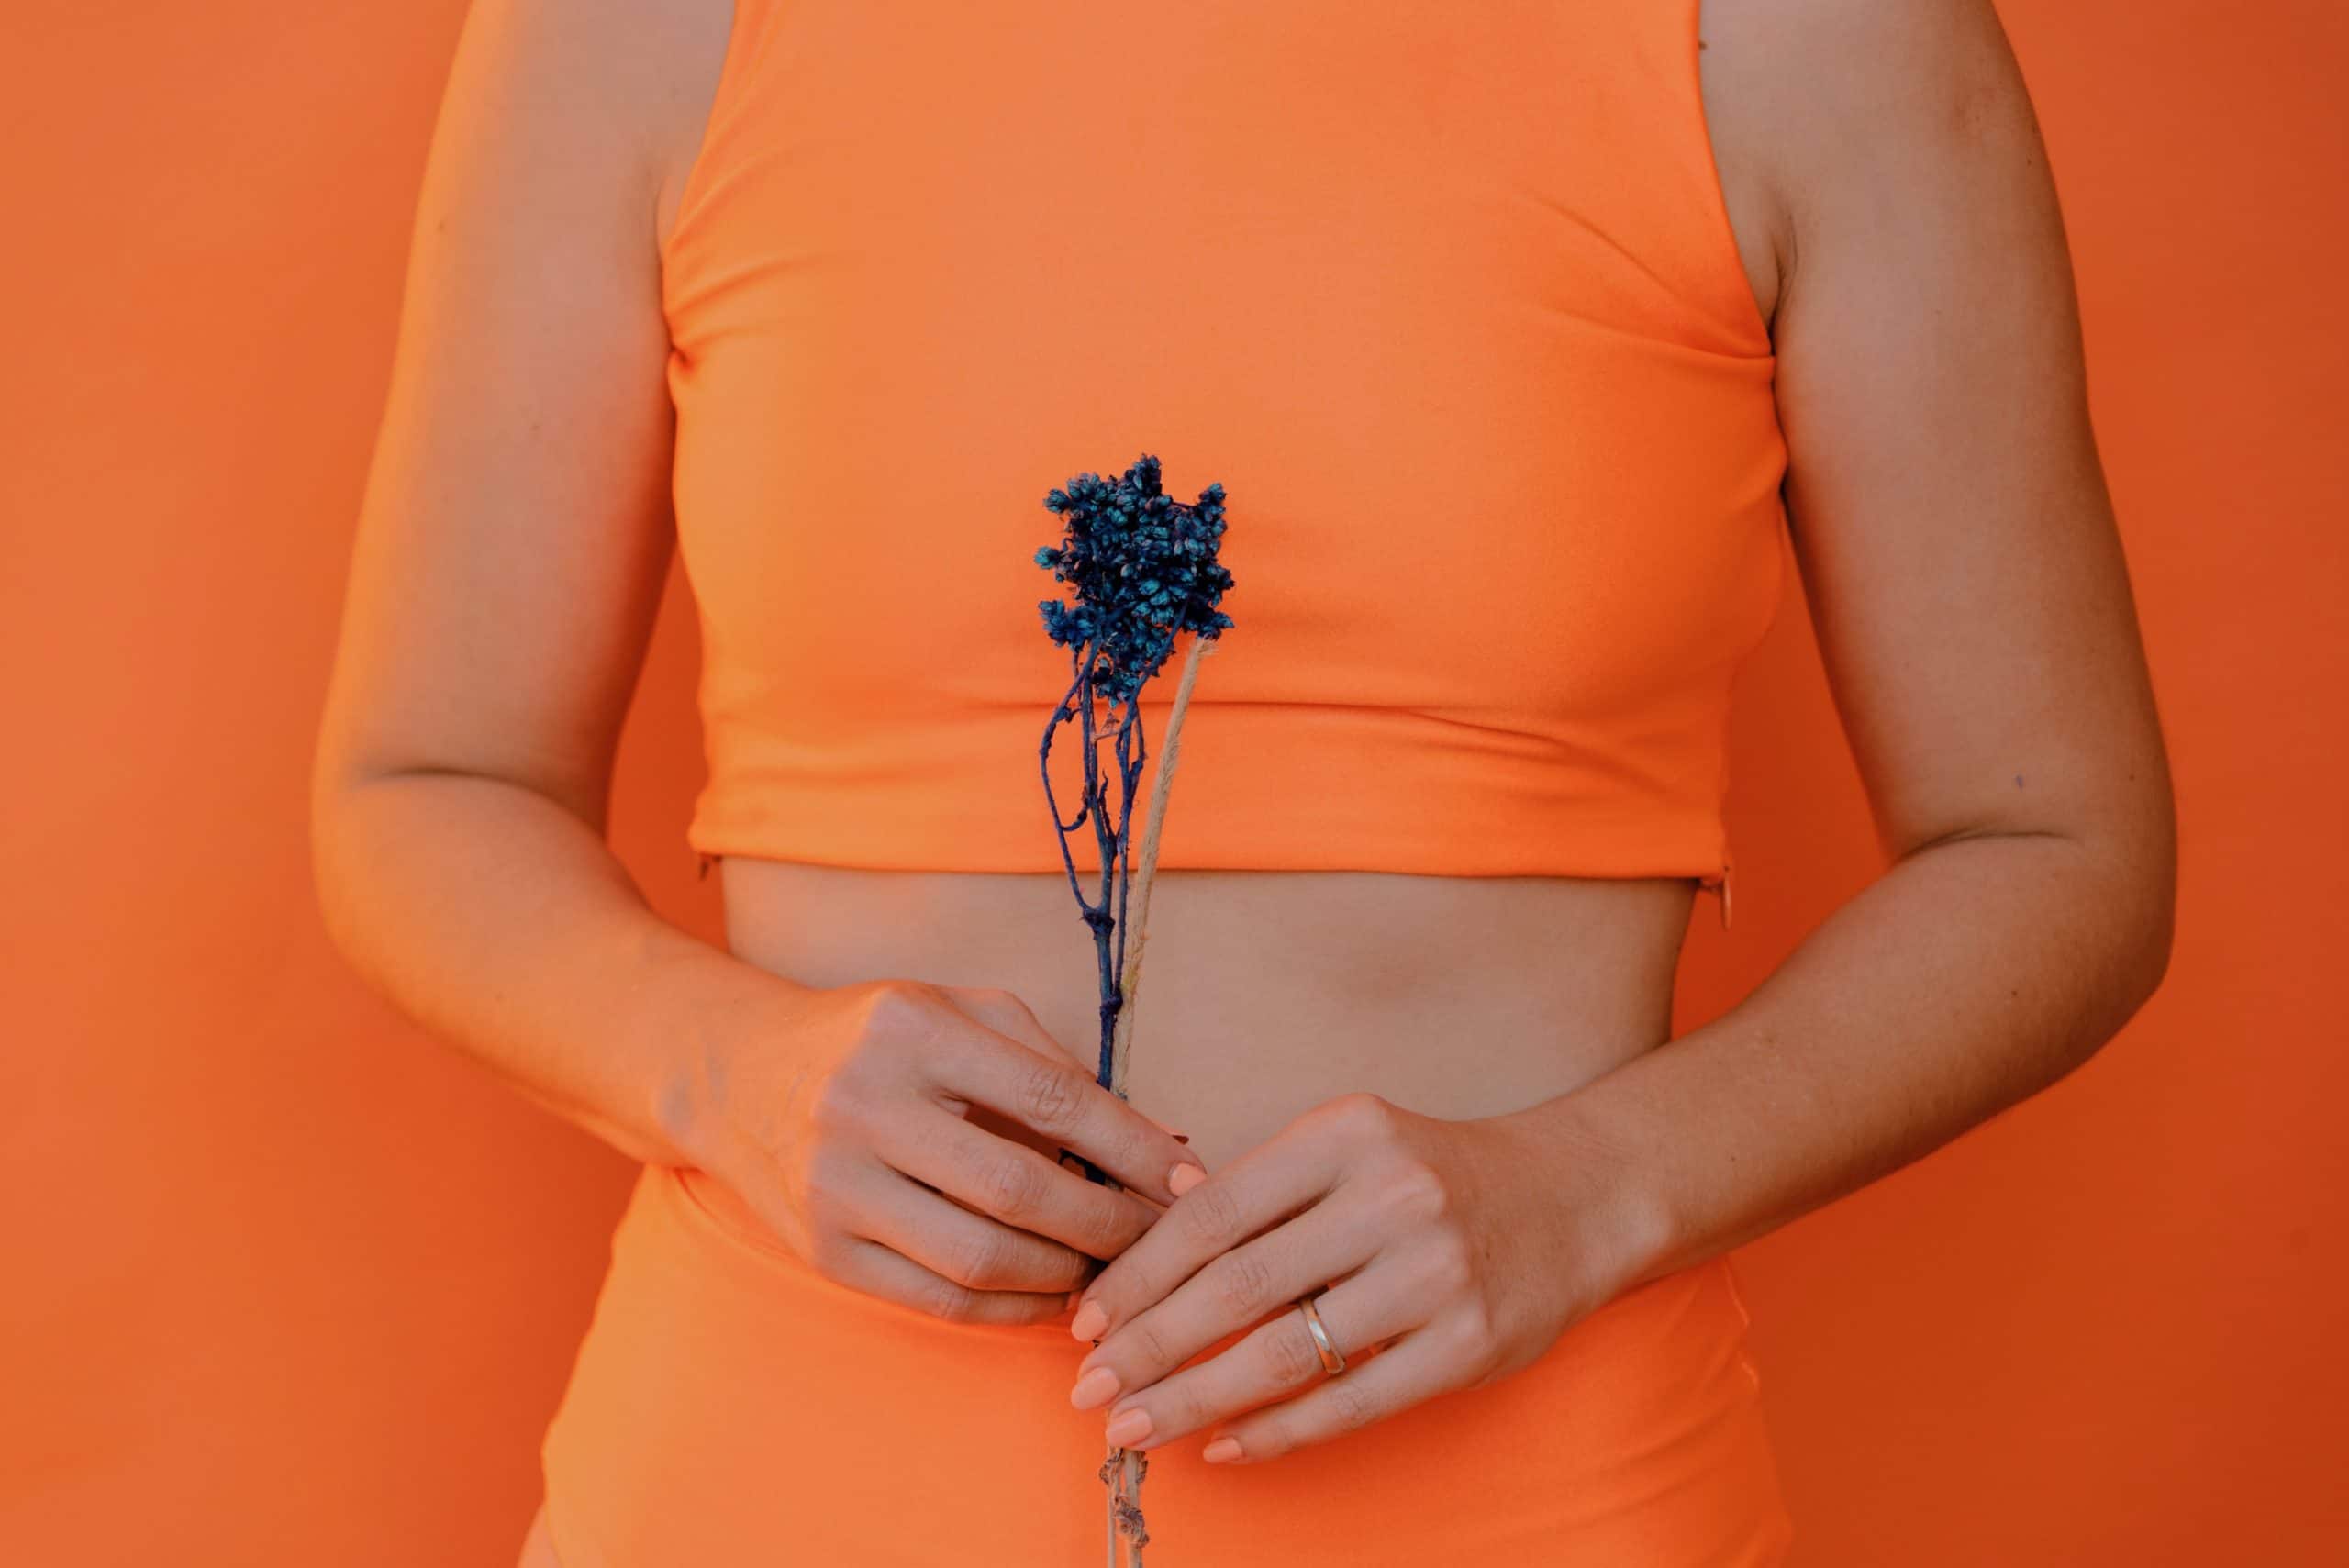 Person wearing an orange outfit and holding a flower in front of an orange background